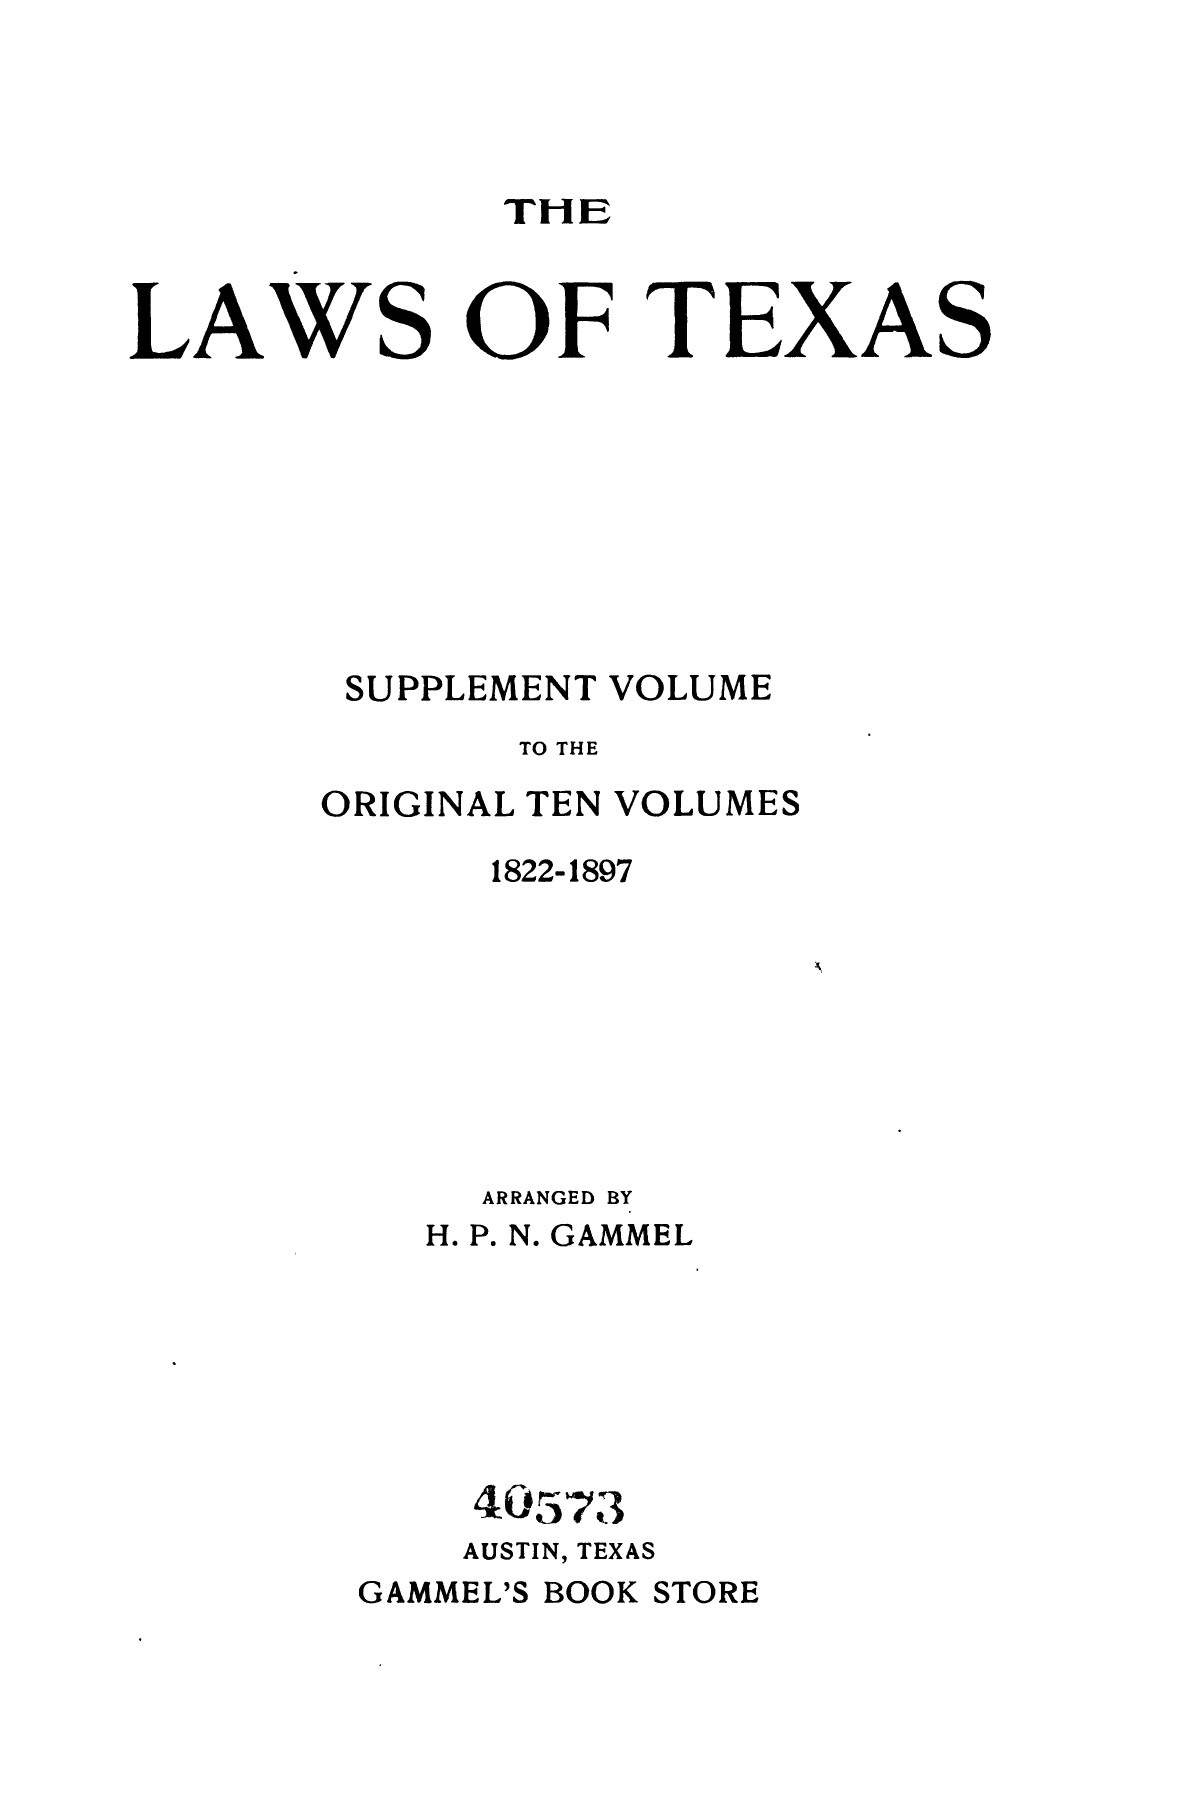 The Laws of Texas, 1915-1917 [Volume 17]
                                                
                                                    [Sequence #]: 1 of 1413
                                                